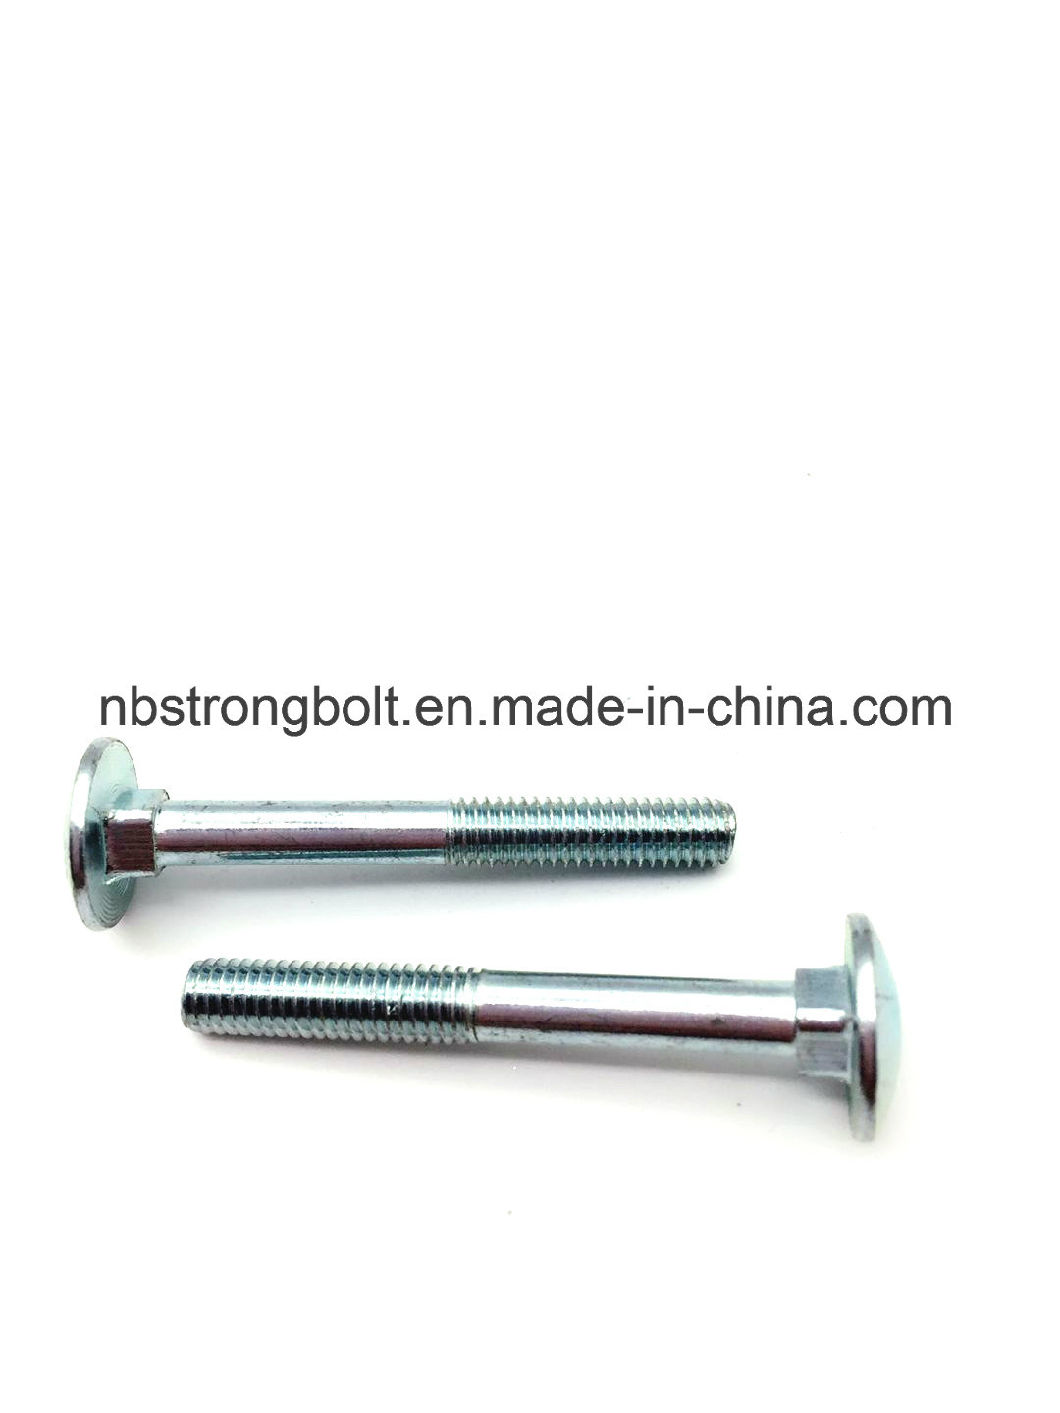 Mushroom Head Square Neck Bolt with Cl. 4.8